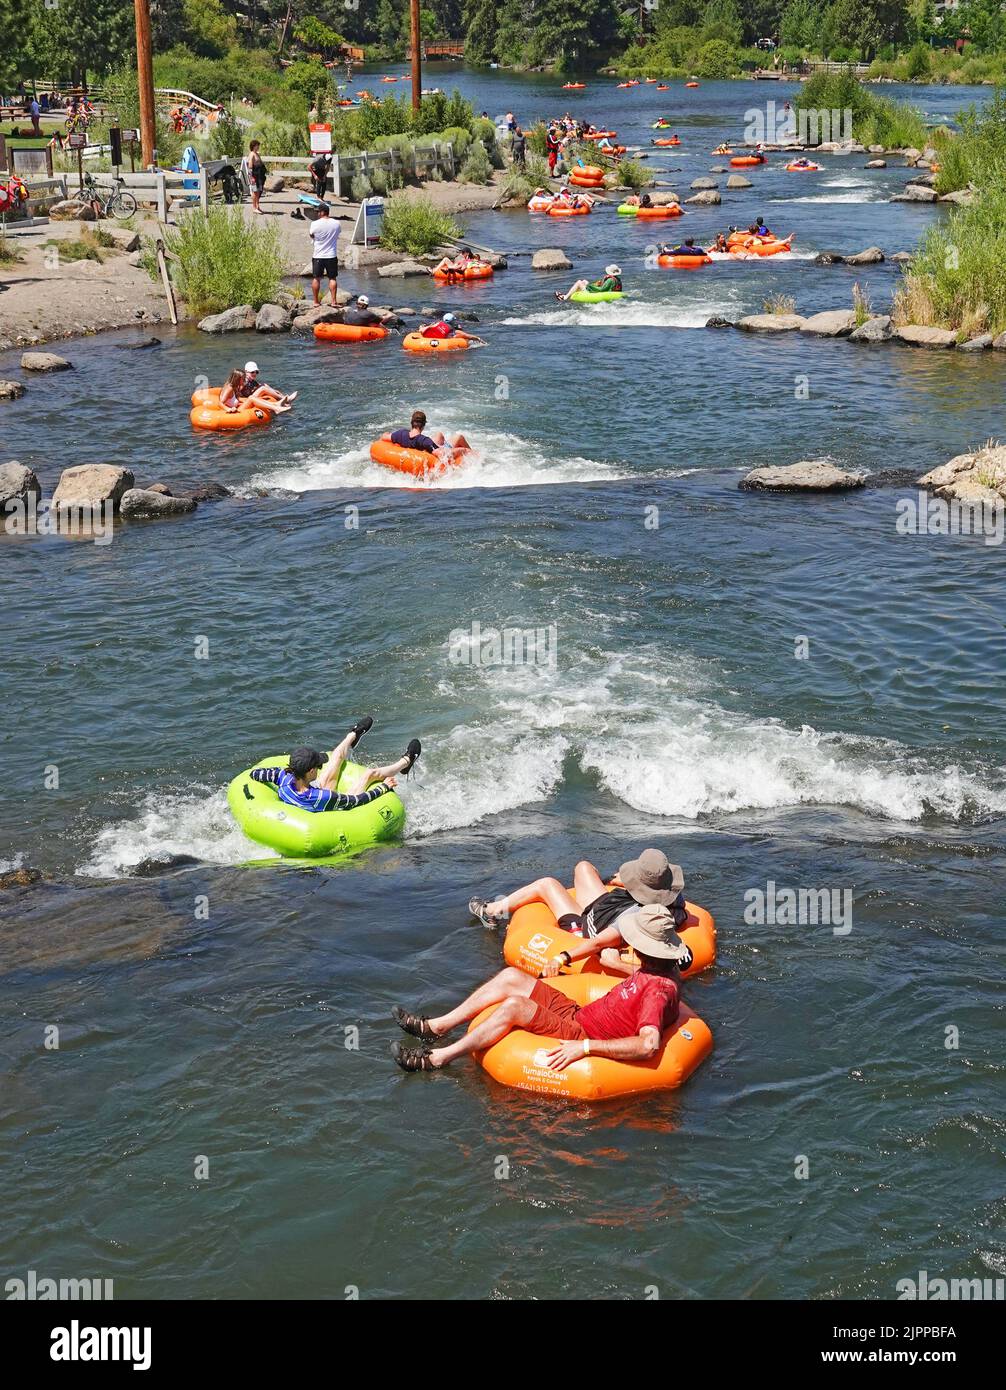 Beating the heat in the American Pacific Northwest. The state of Oregon and the Pacific Northwest in general is undergoing another major heatwave with temperatures reaching 100 degrees farenheit plus during the afternoons. Floating the river is a popular way to cool off. This is the Deschutes River in Bend, Oregon. Stock Photo